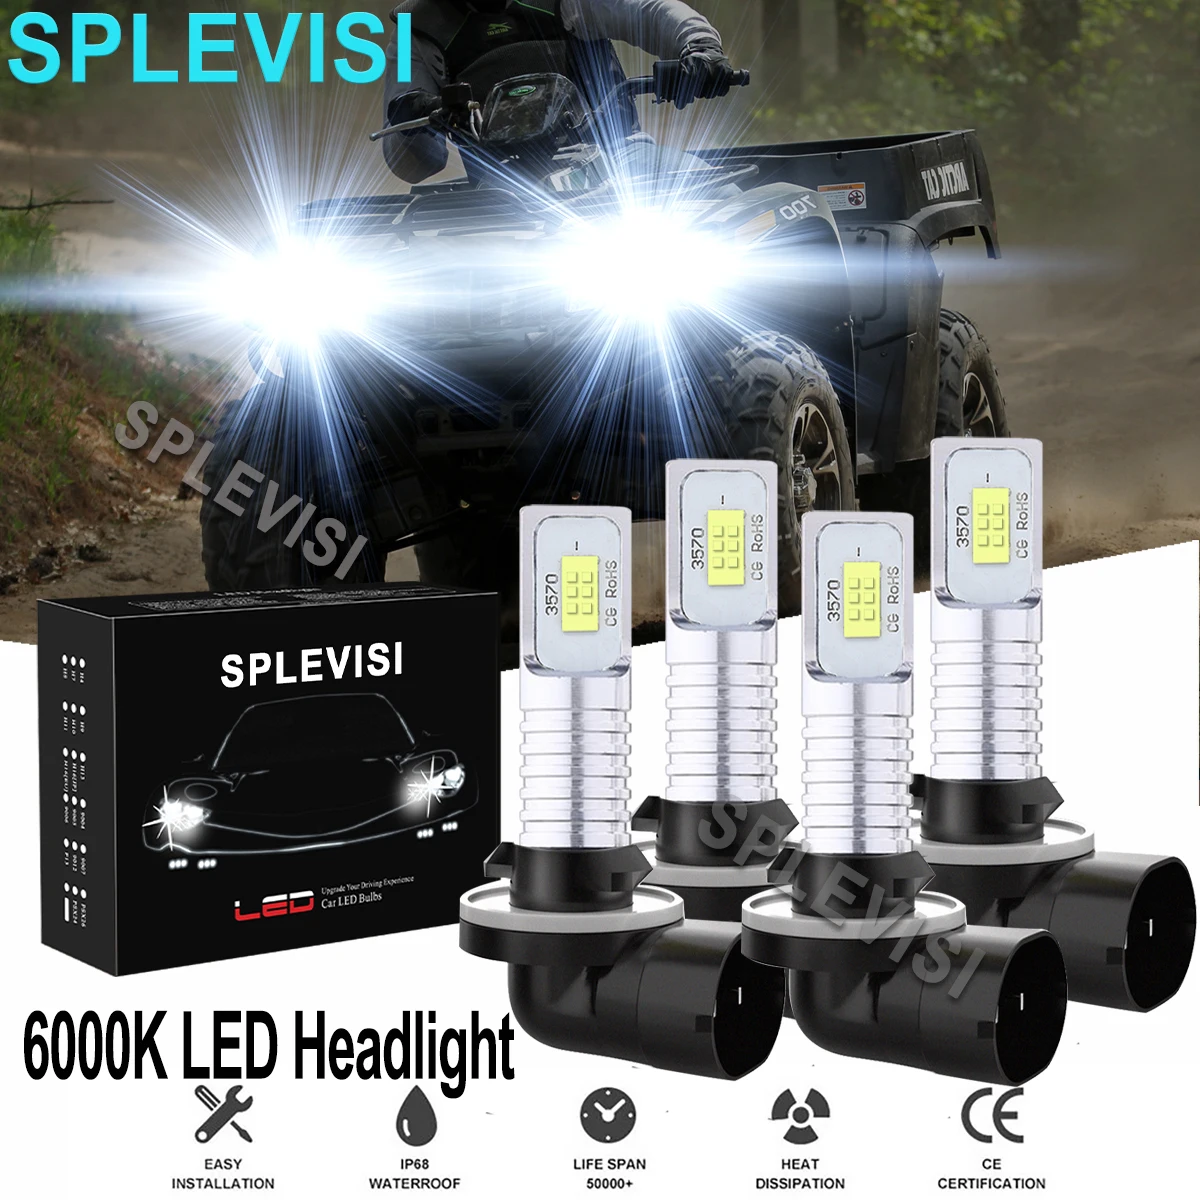 4x 140W 6000K Pure White LED Headlight Bulbs Kit  For ARCTIC CAT 400 500 650 700 HIGH LOW BEAM high quality p15d led motorcycle headlight h6m led moto hi lo beam bulbs for motorbike scooter moped headlamp 15w white 2pcs lot